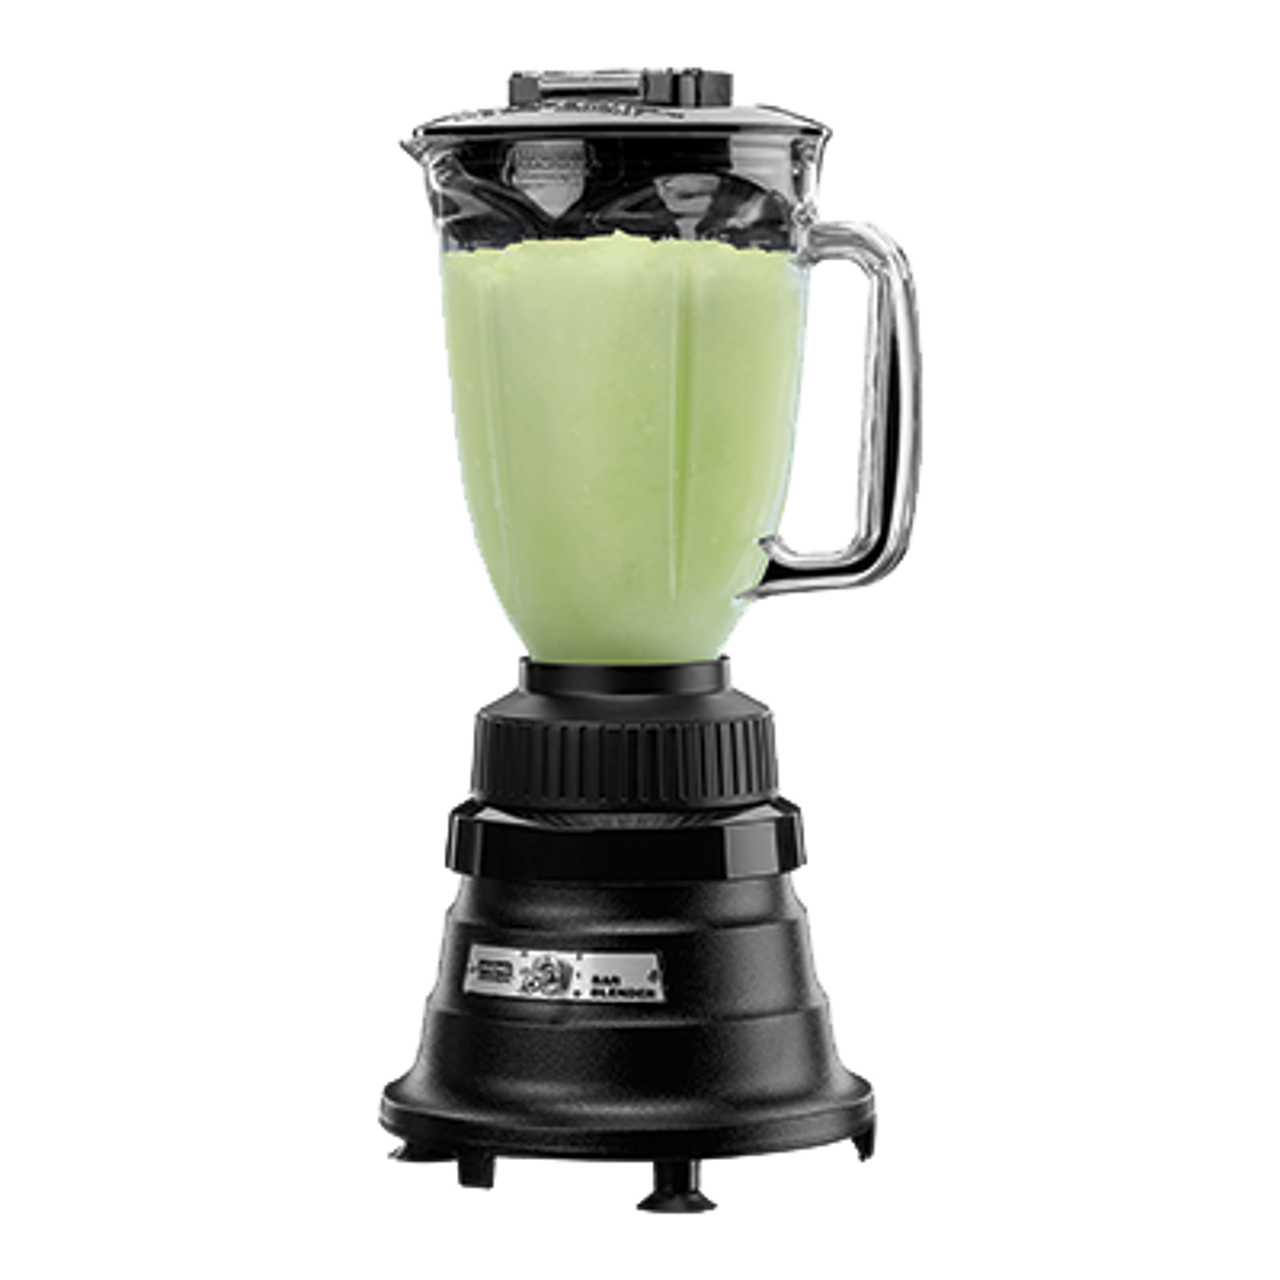 High-Power Blender, 64oz, Plastic Container, Stainless Steel Blades, Black,  WARNING MX1000XTX